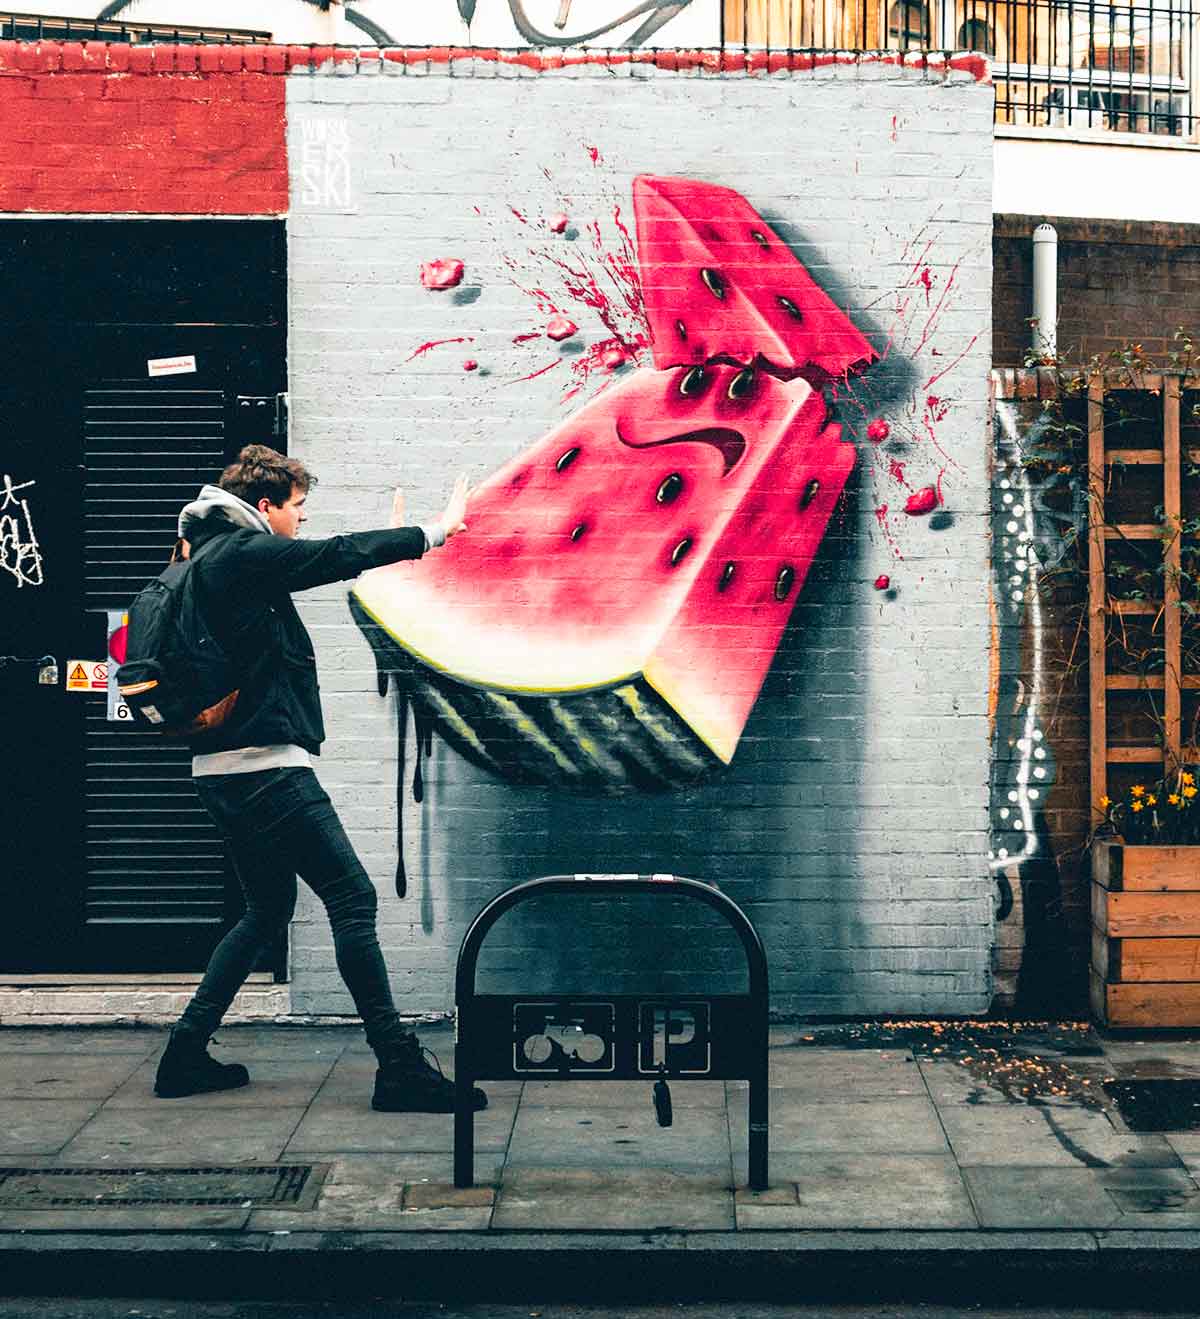 A person holding their arms up against a wall that has watermelon grafitti painted on it.